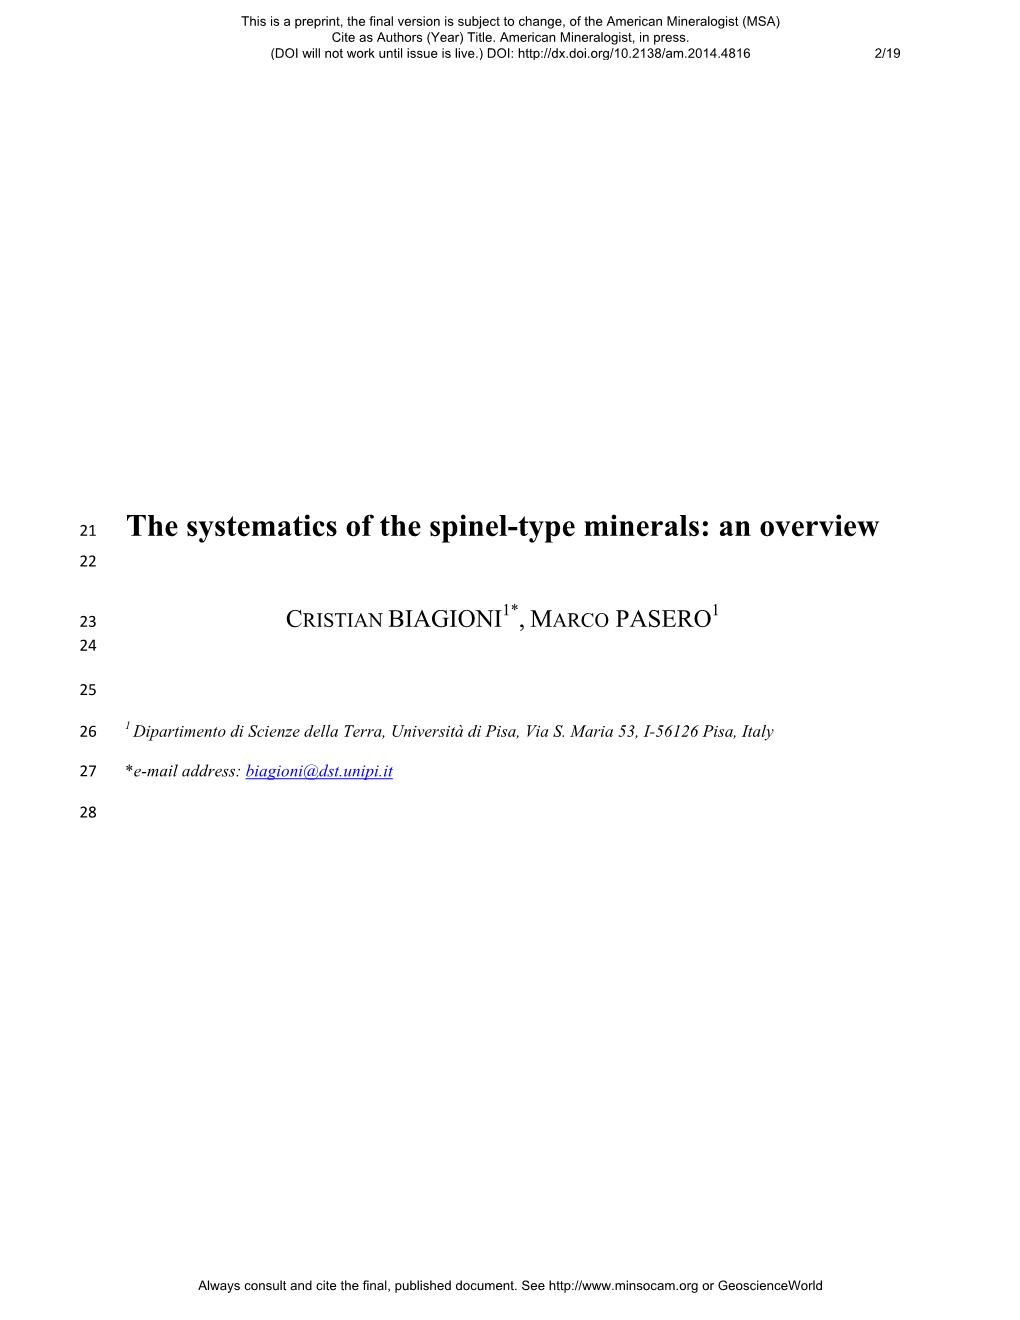 The Systematics of the Spinel-Type Minerals: an Overview 22